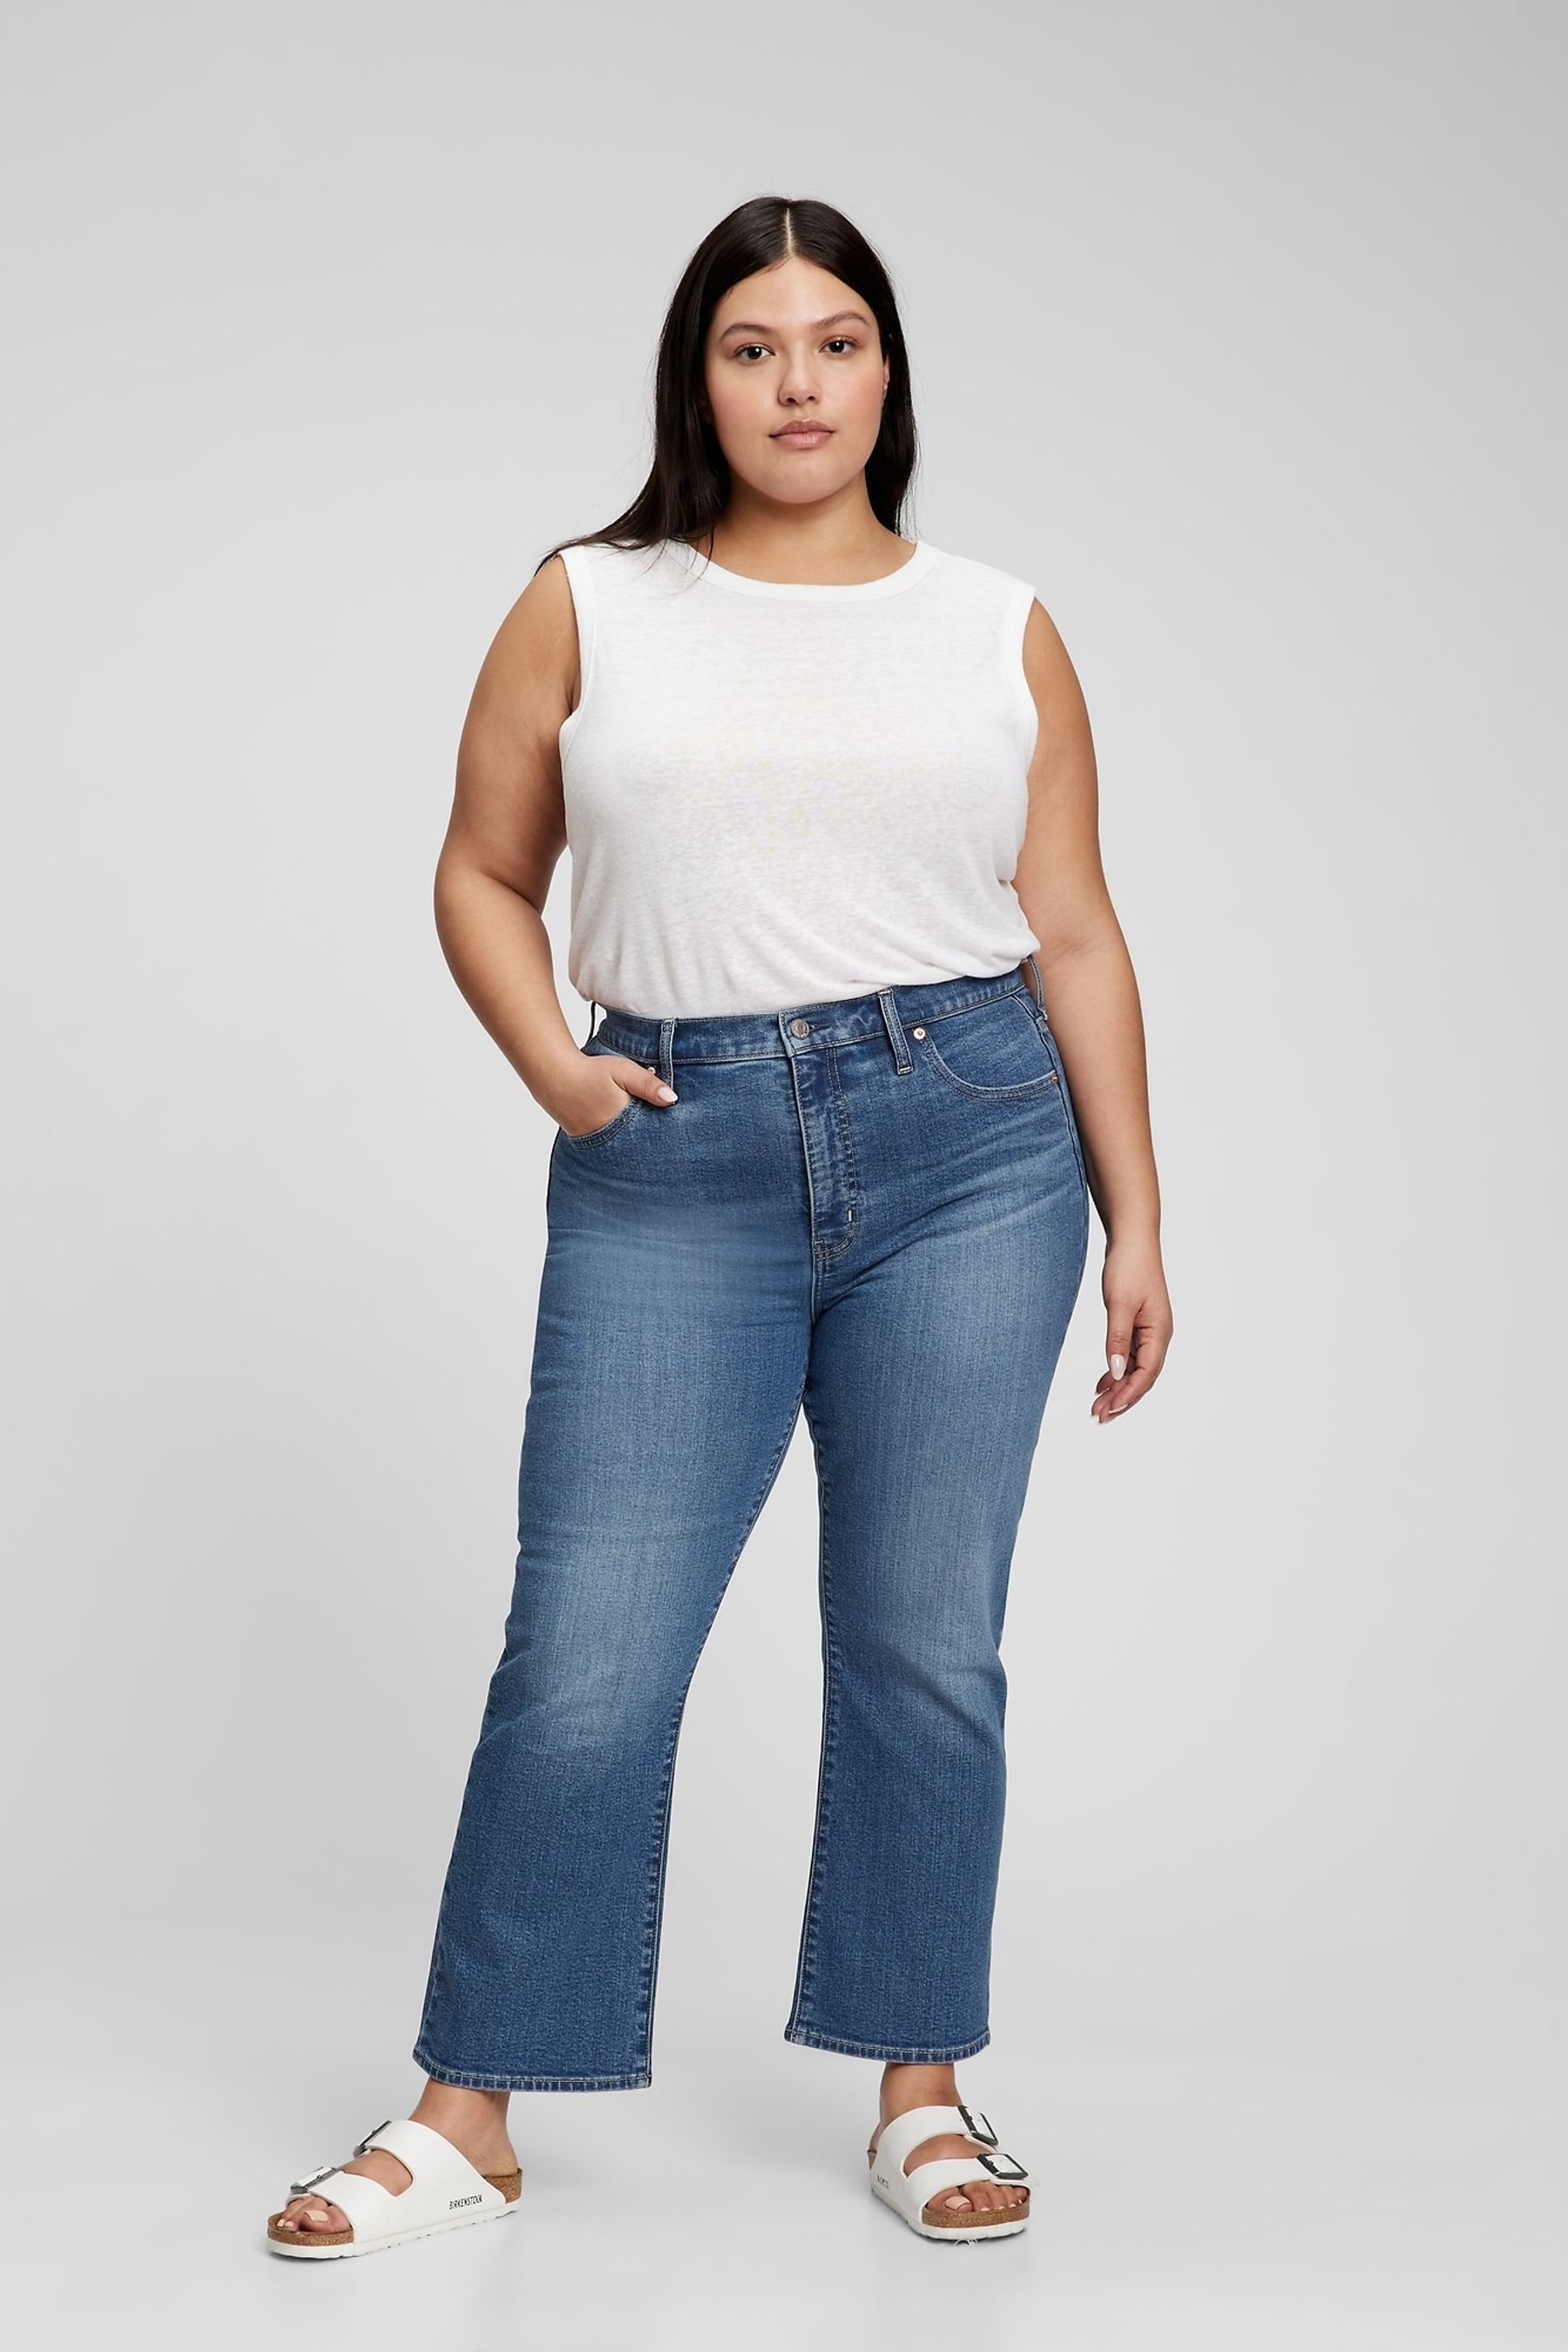 Buy Gap High Waisted Kick Fit Jeans from the Gap online shop